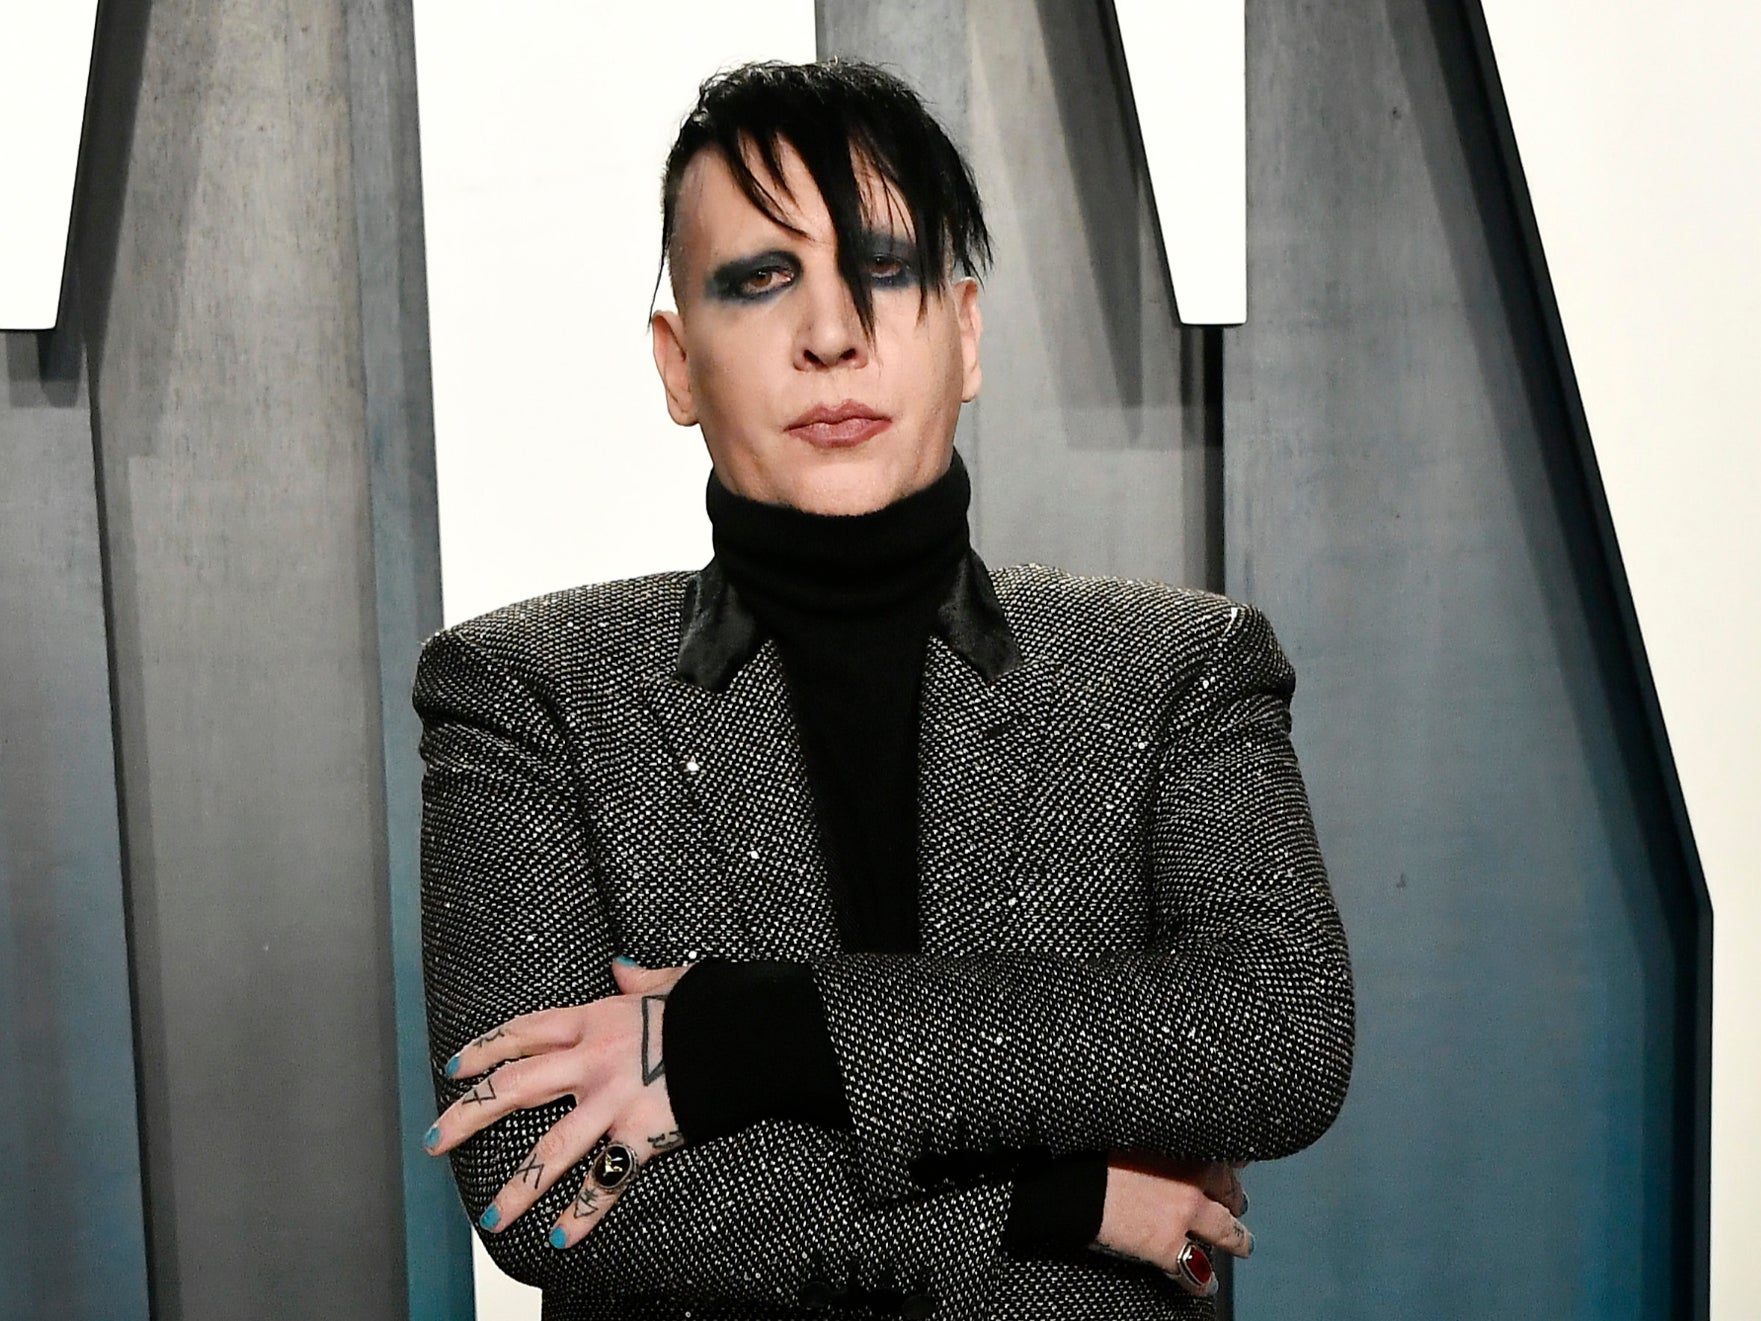 Marilyn Manson at the 2020 Vanity Fair Oscar Party on 9 February 2020 in Beverly Hills, California